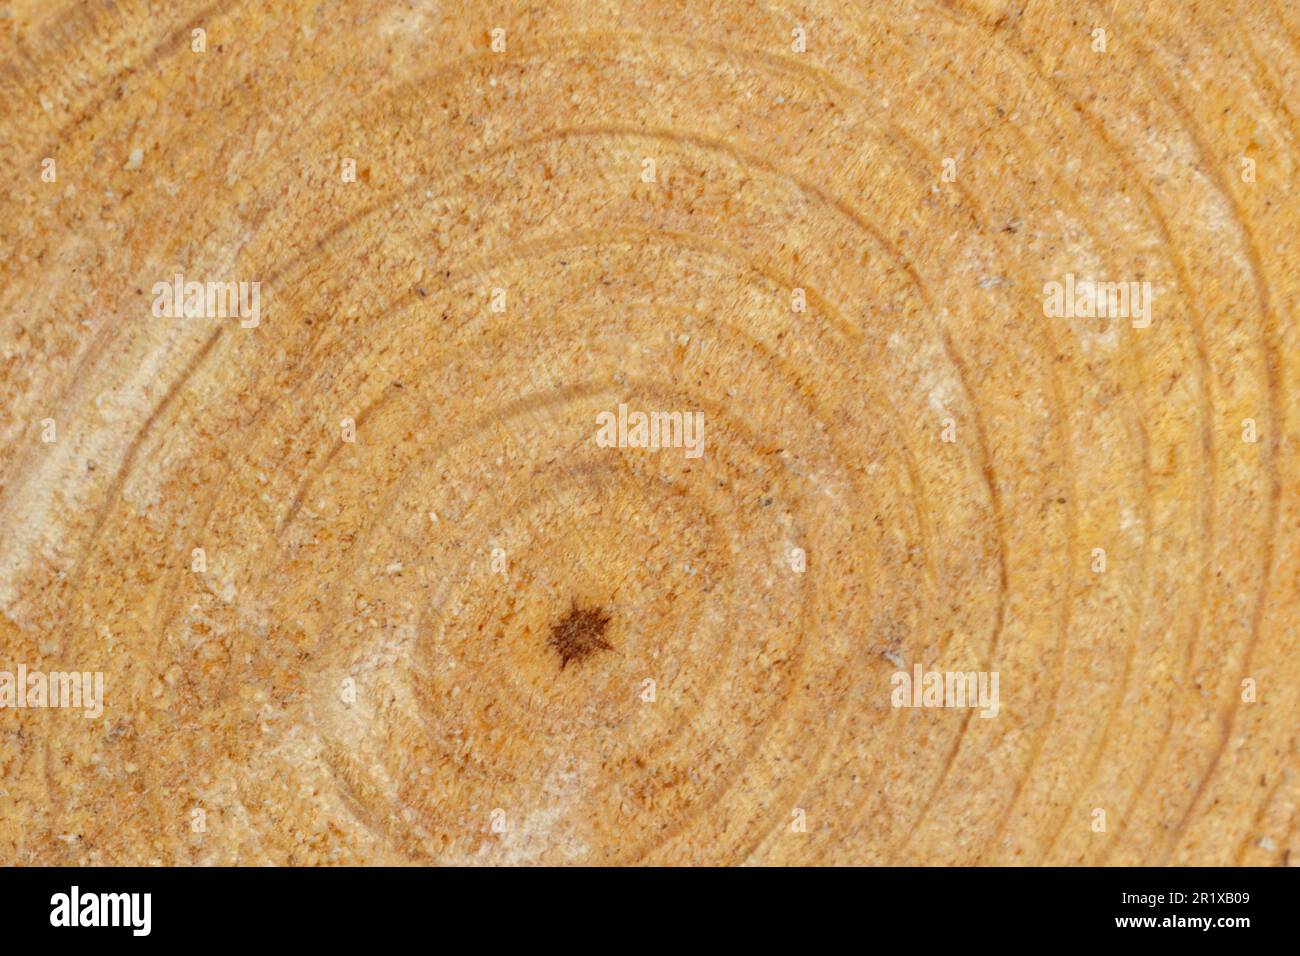 Rings on end of cut pine tree, space for copy on background. Stock Photo